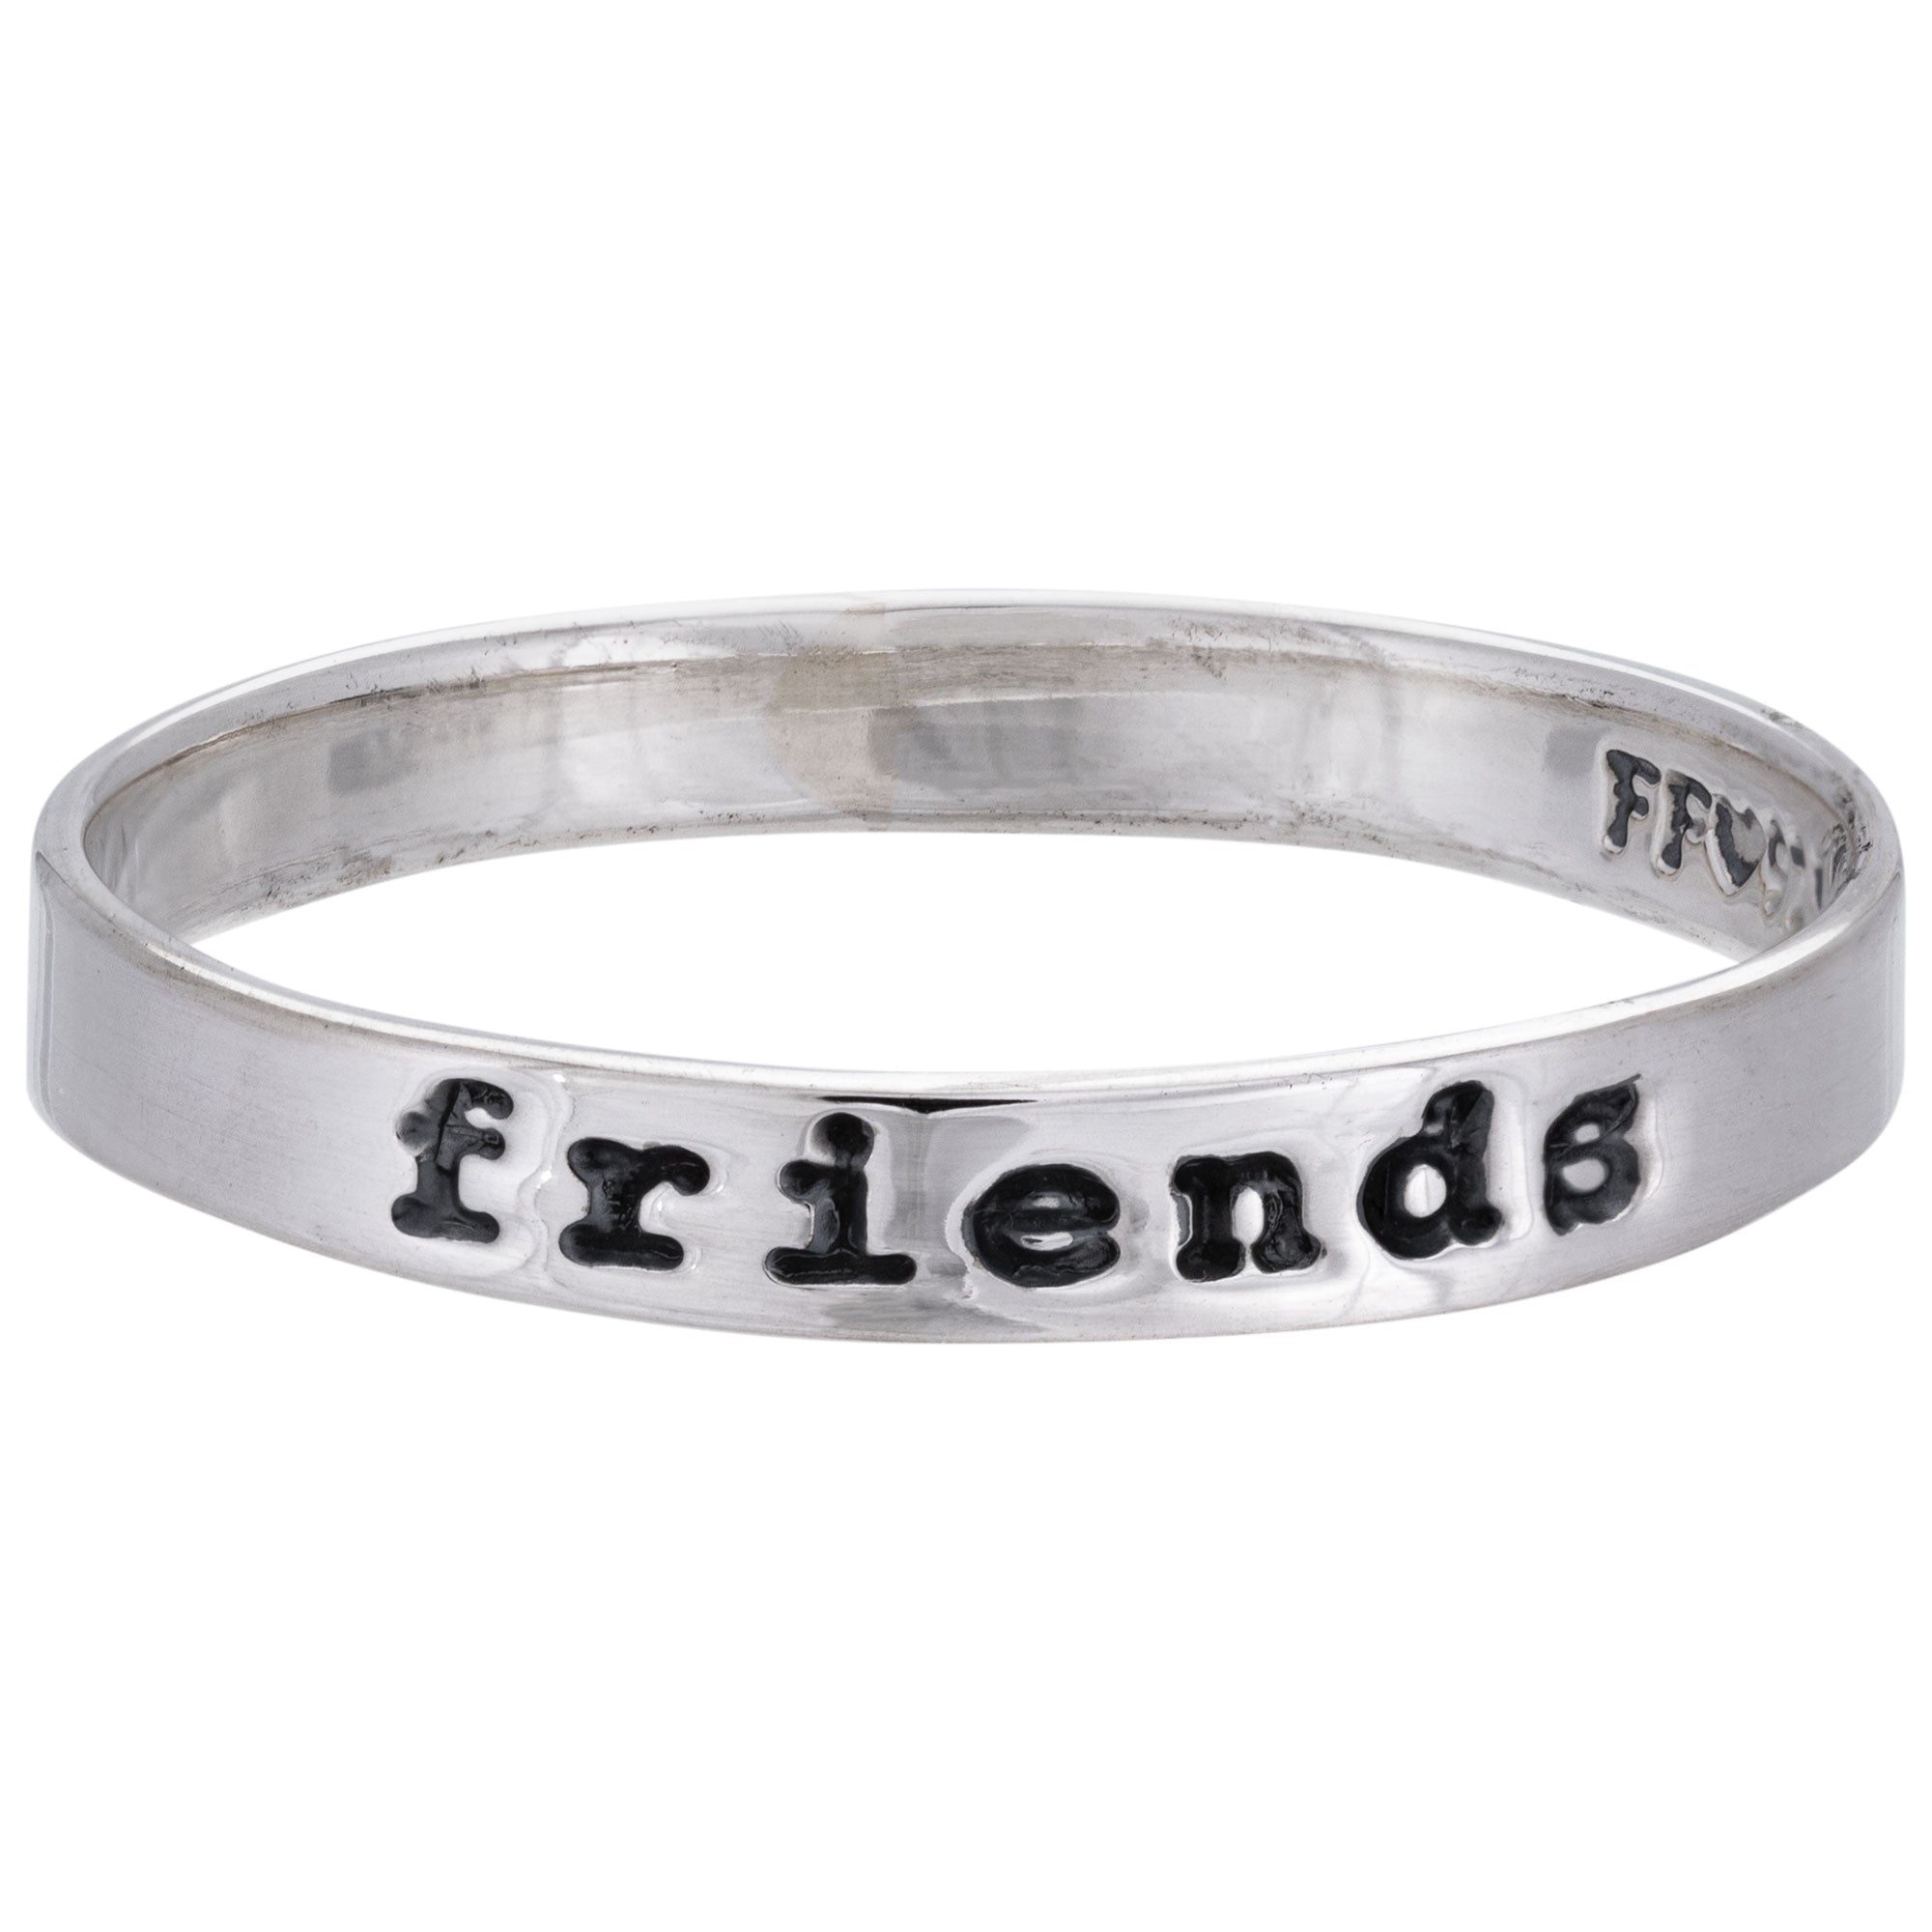 Friends Sterling Silver Ring - 8